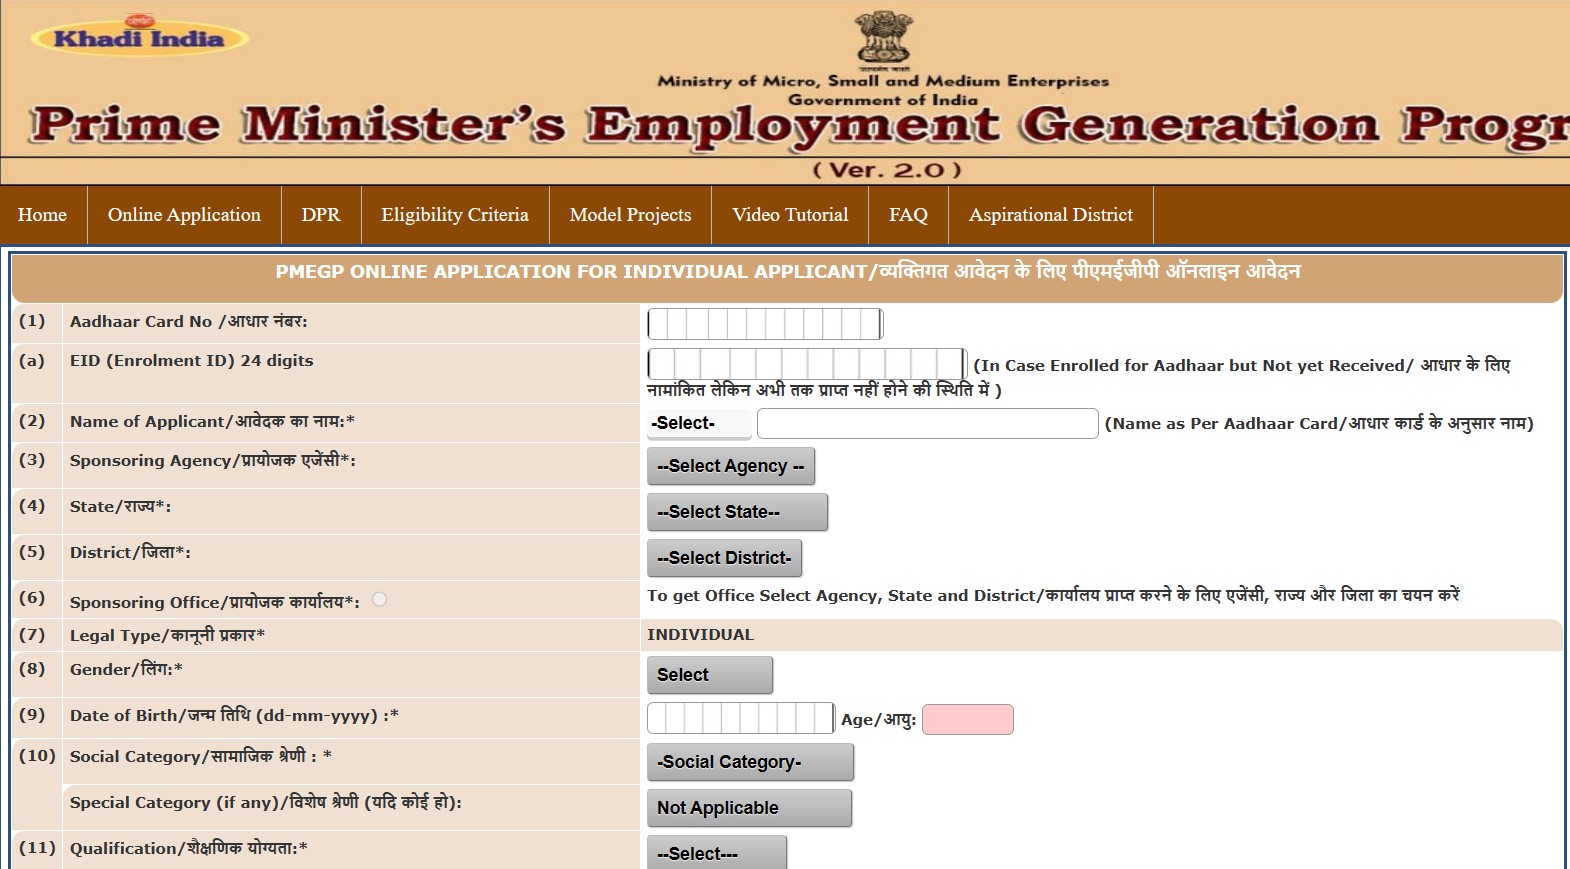 PMEGP application for new individual